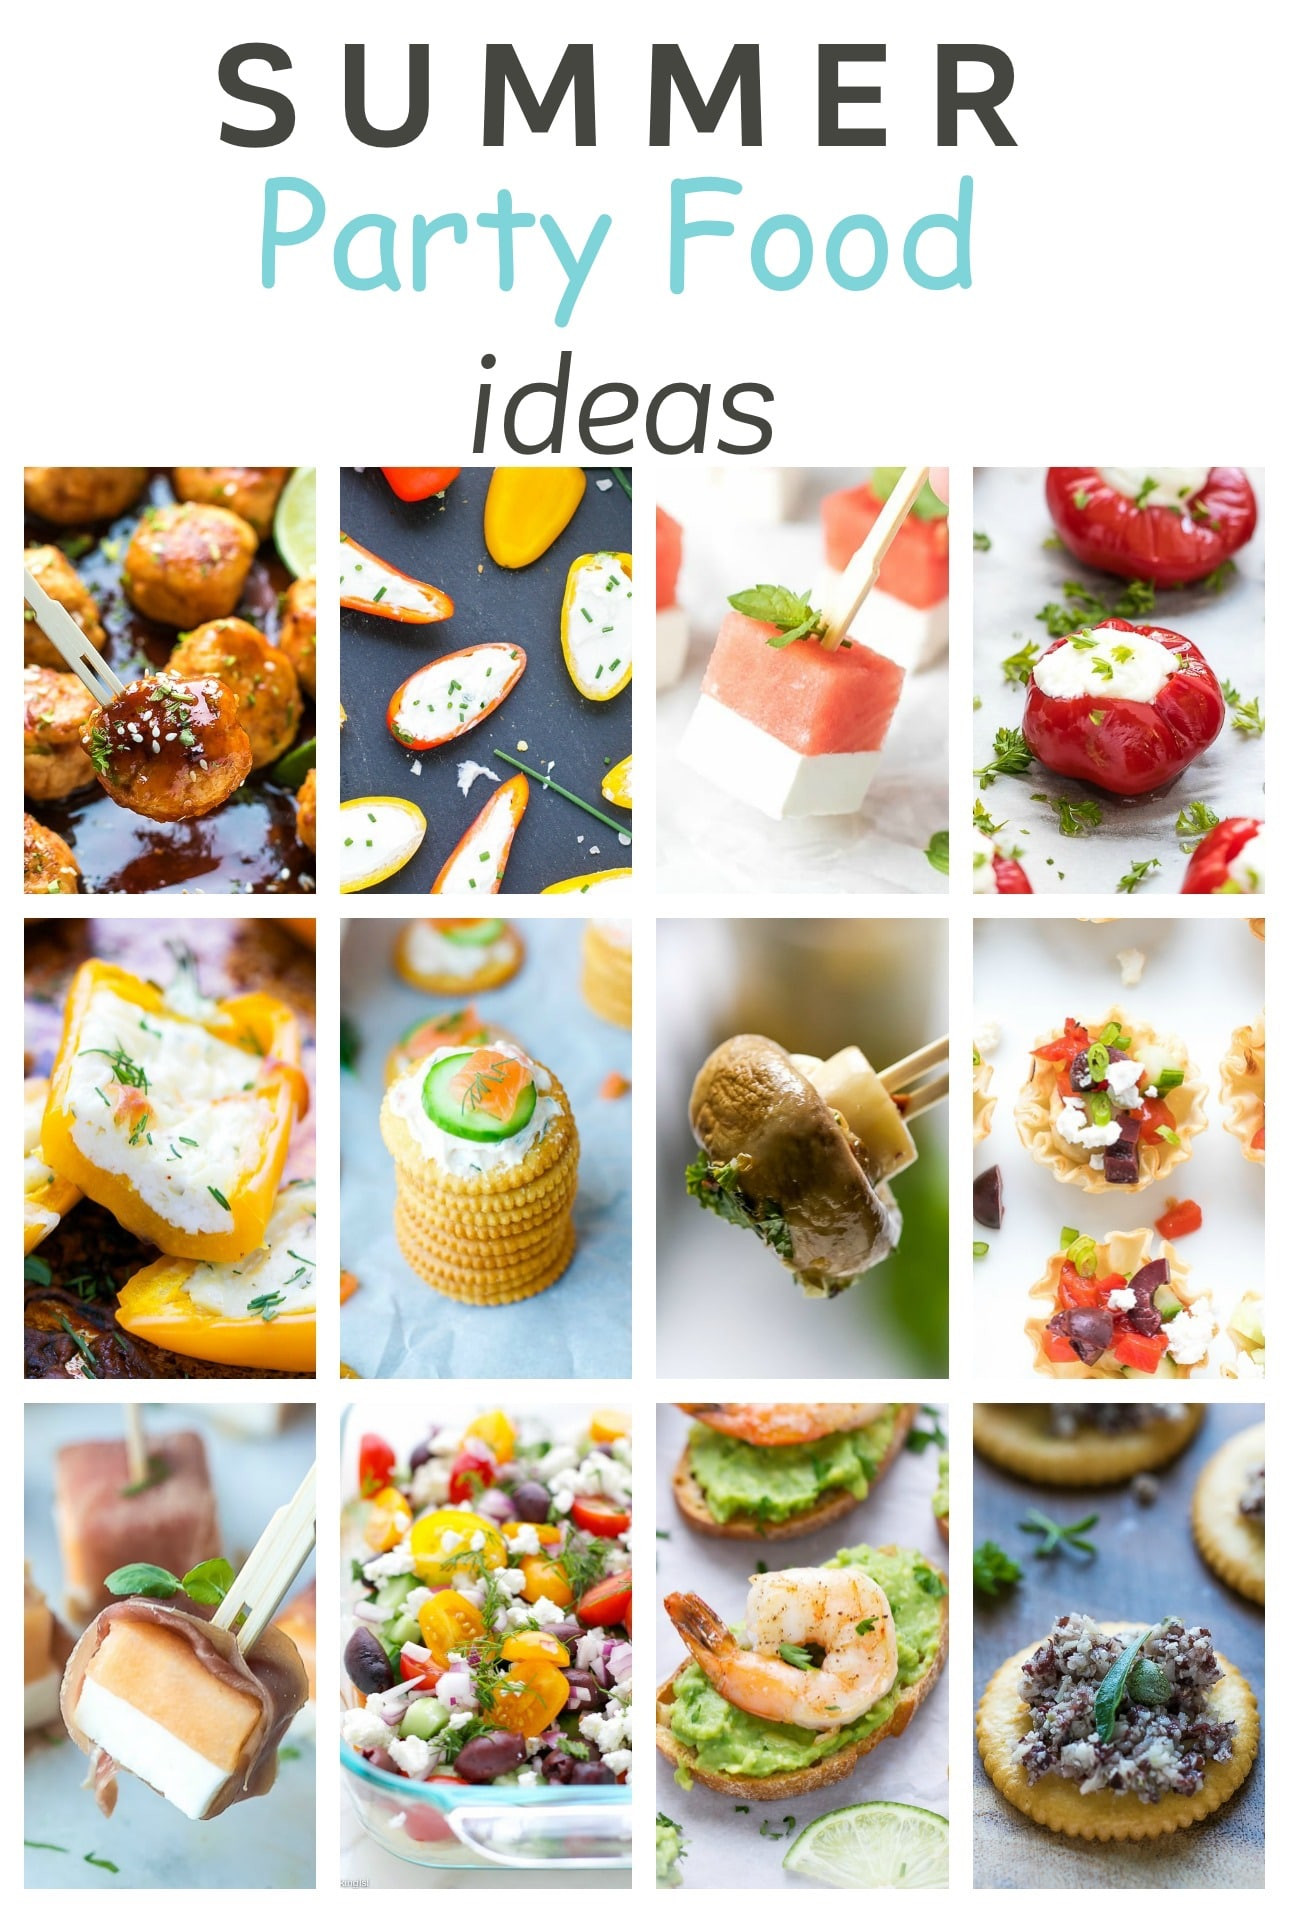 Summer Party Menu Ideas
 Easy Summer Party Food Ideas Cooking LSL